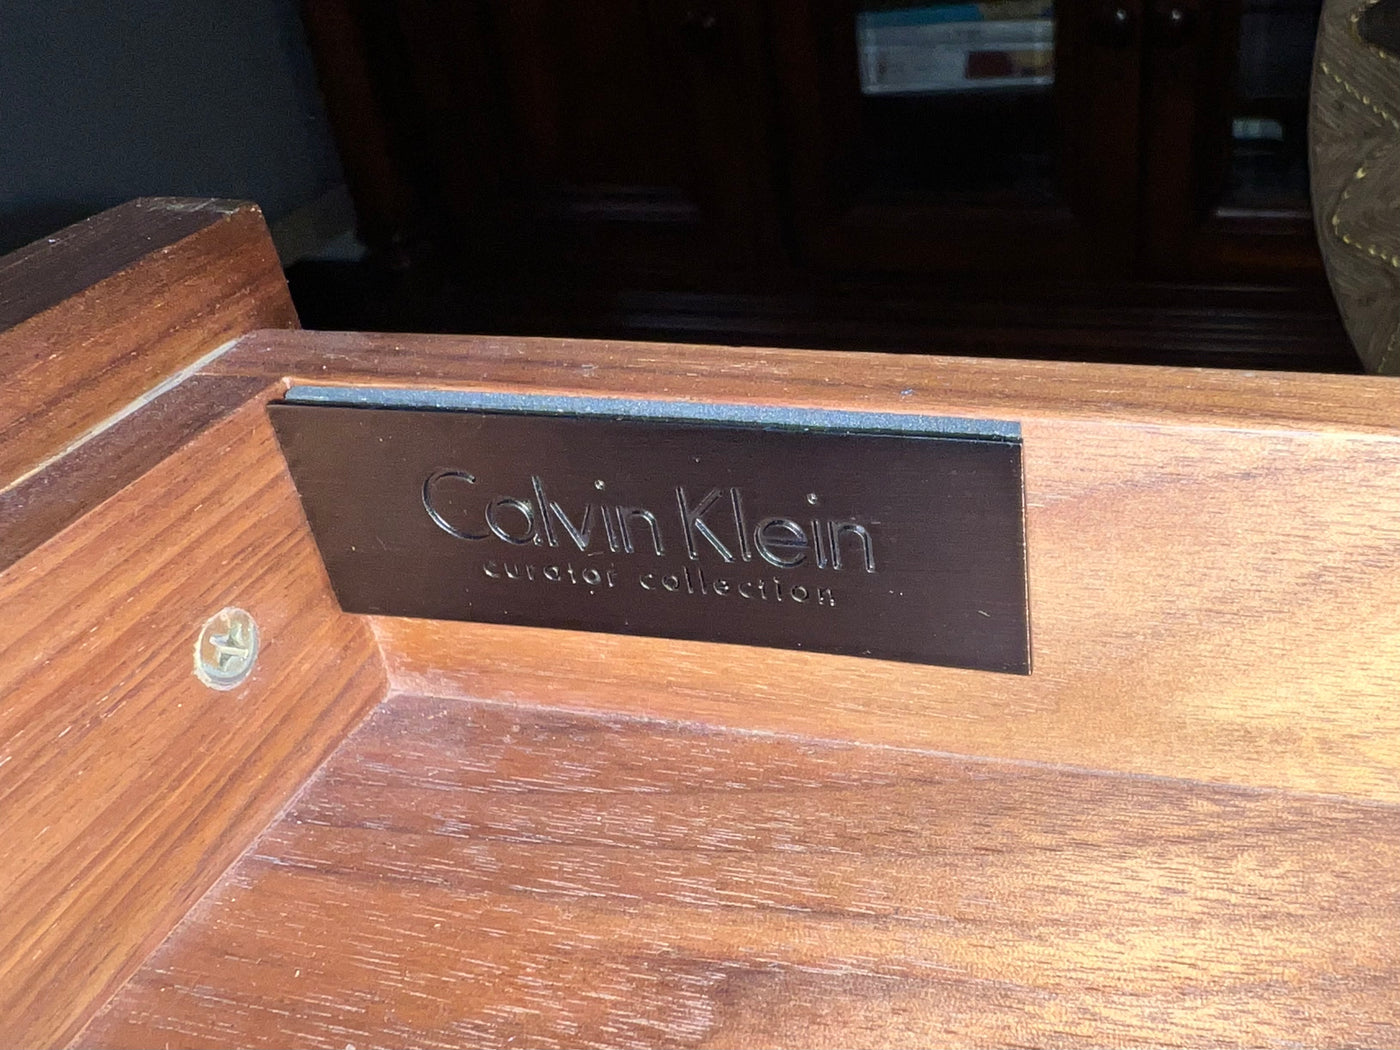 Calvin Klein Walnut End Table with Drawer